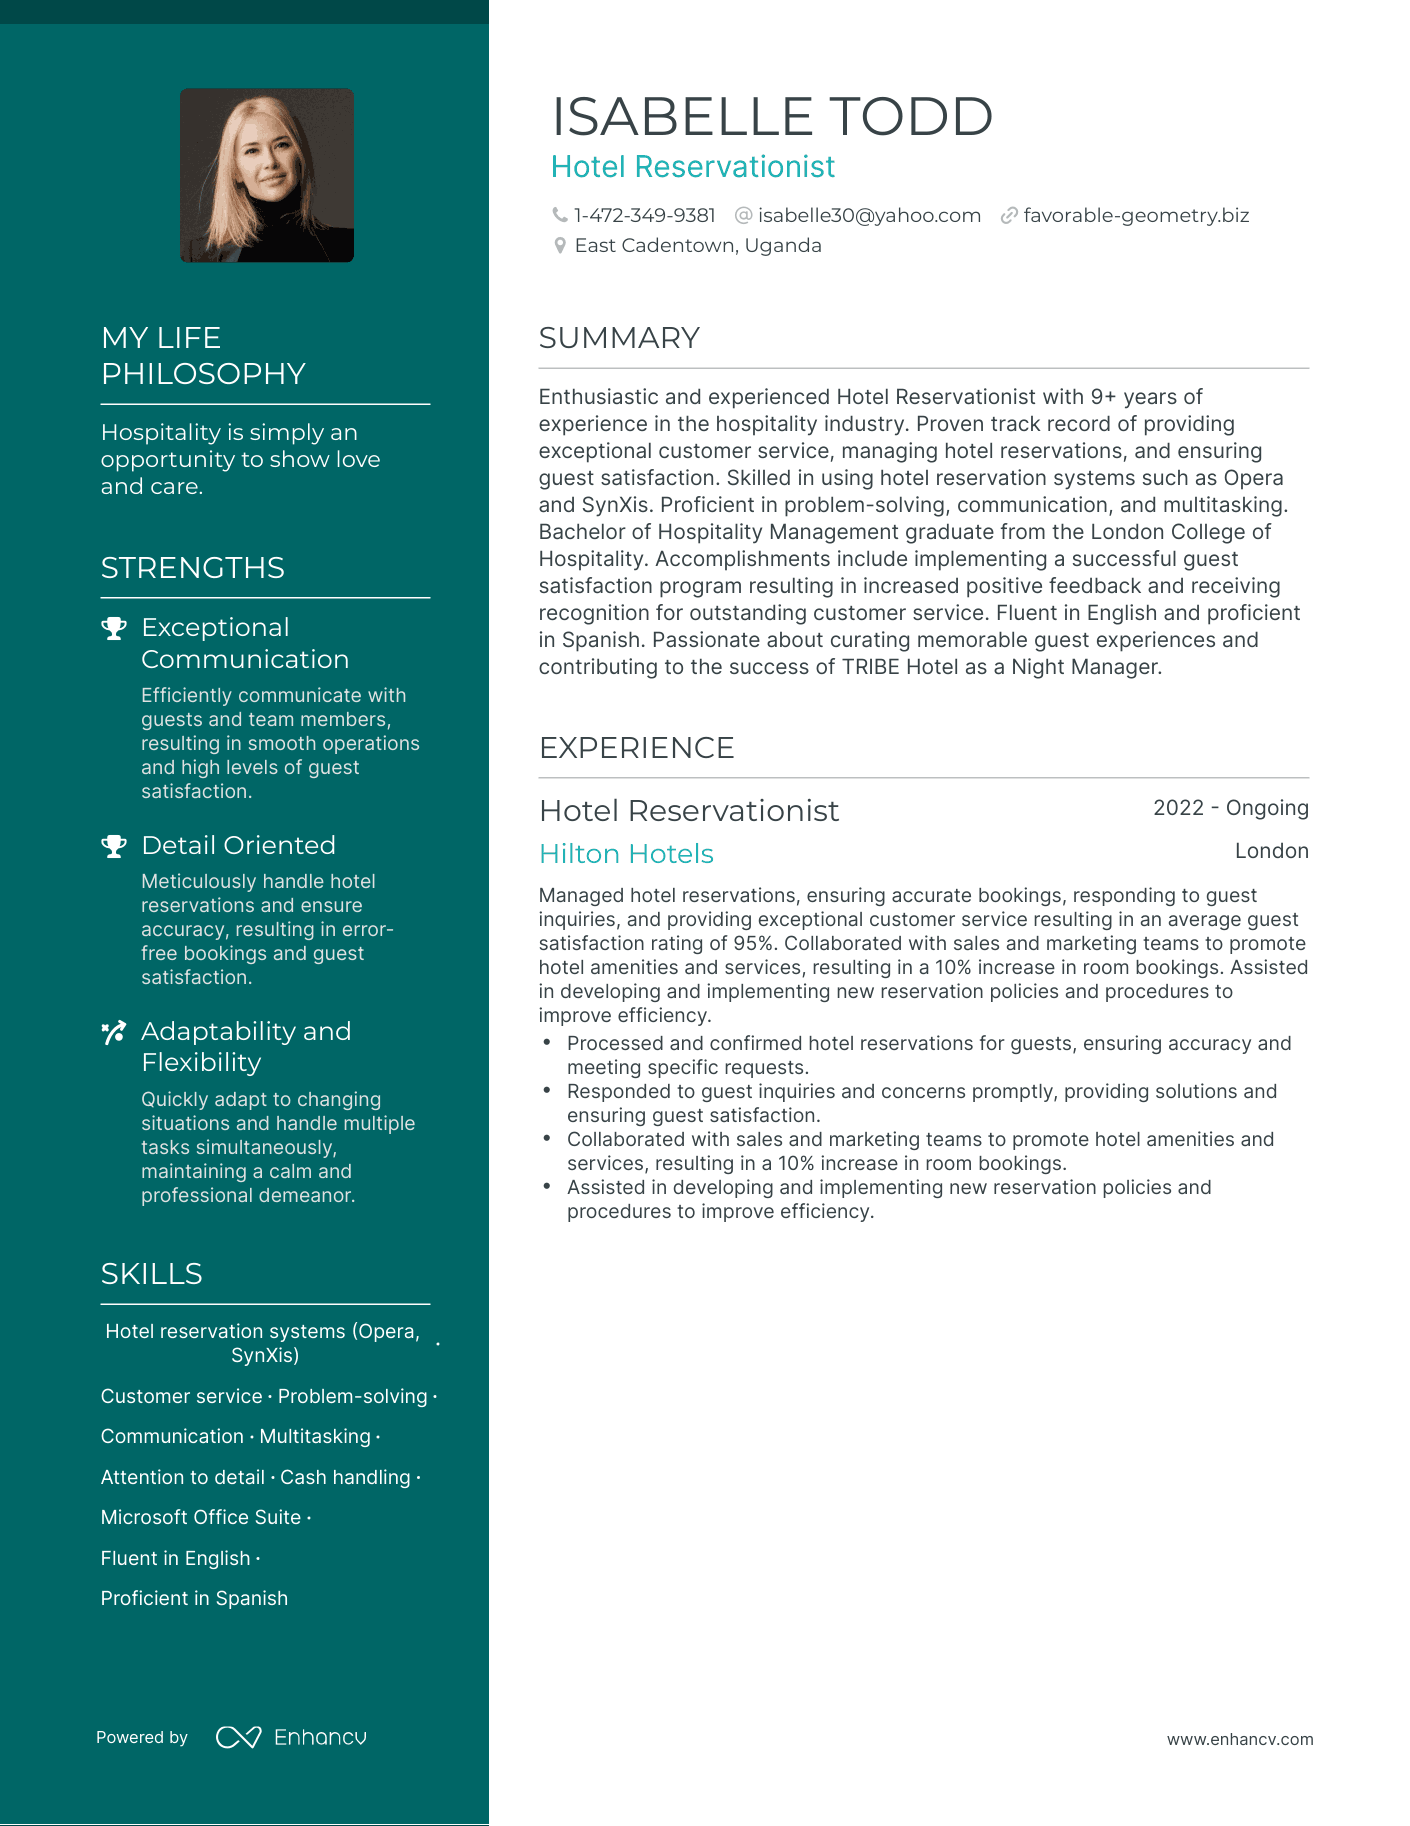 Hotel Reservationist resume example